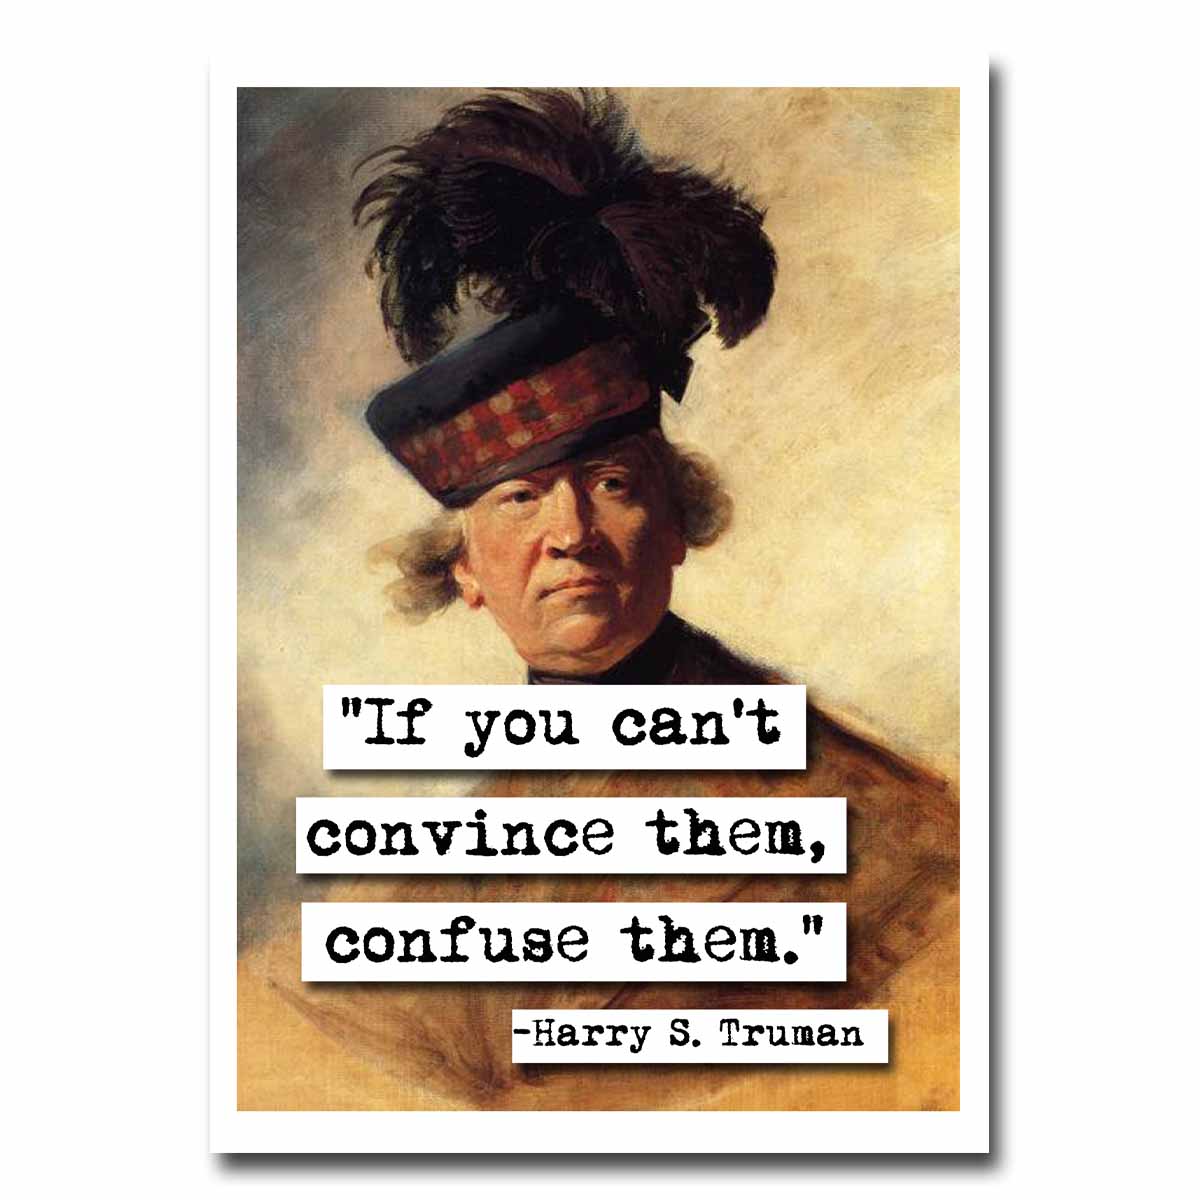 Harry S. Truman Confuse Them Quote Blank Greeting Card